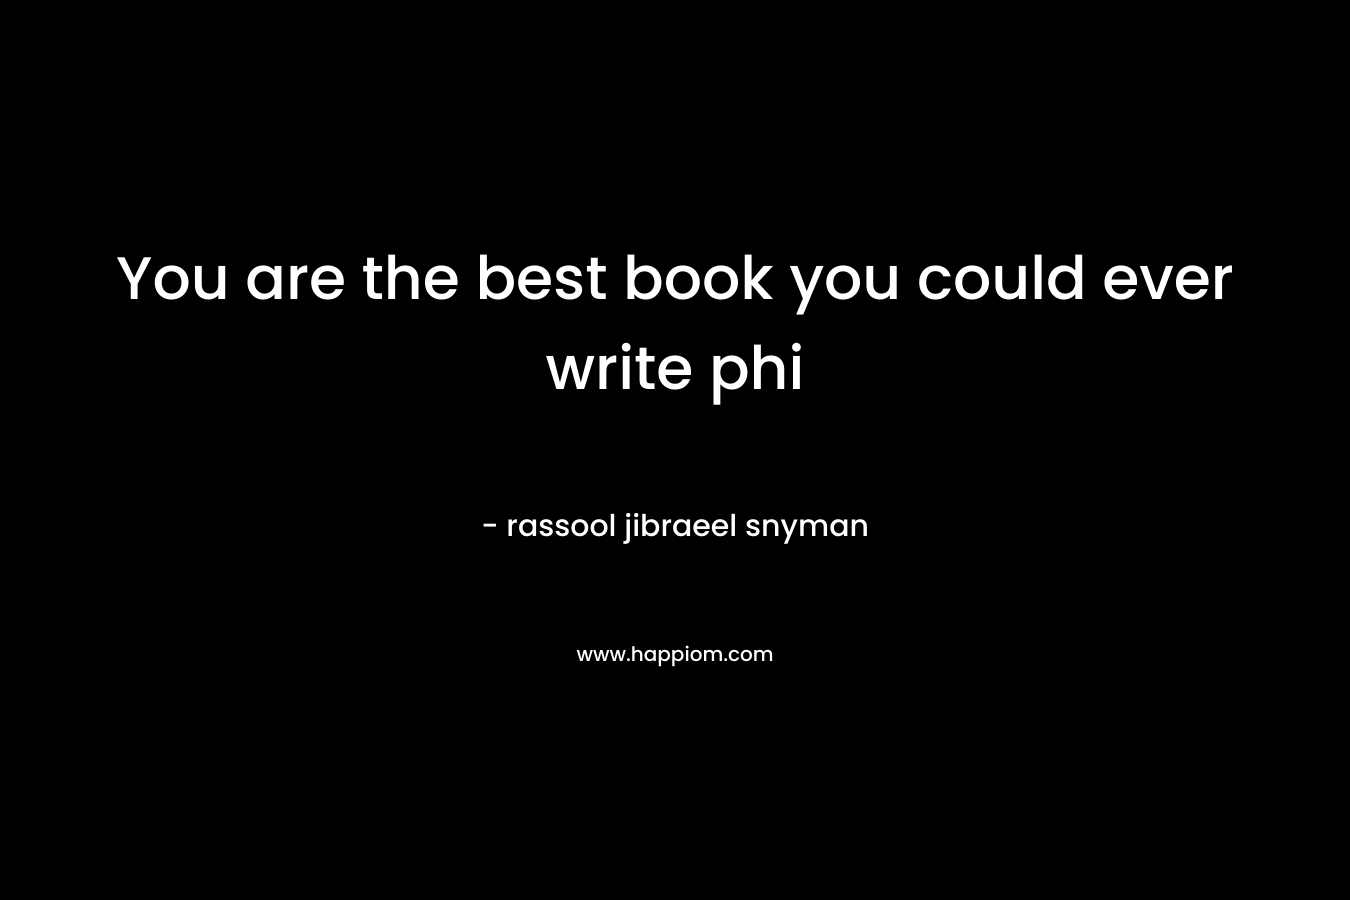 You are the best book you could ever write phi – rassool jibraeel snyman